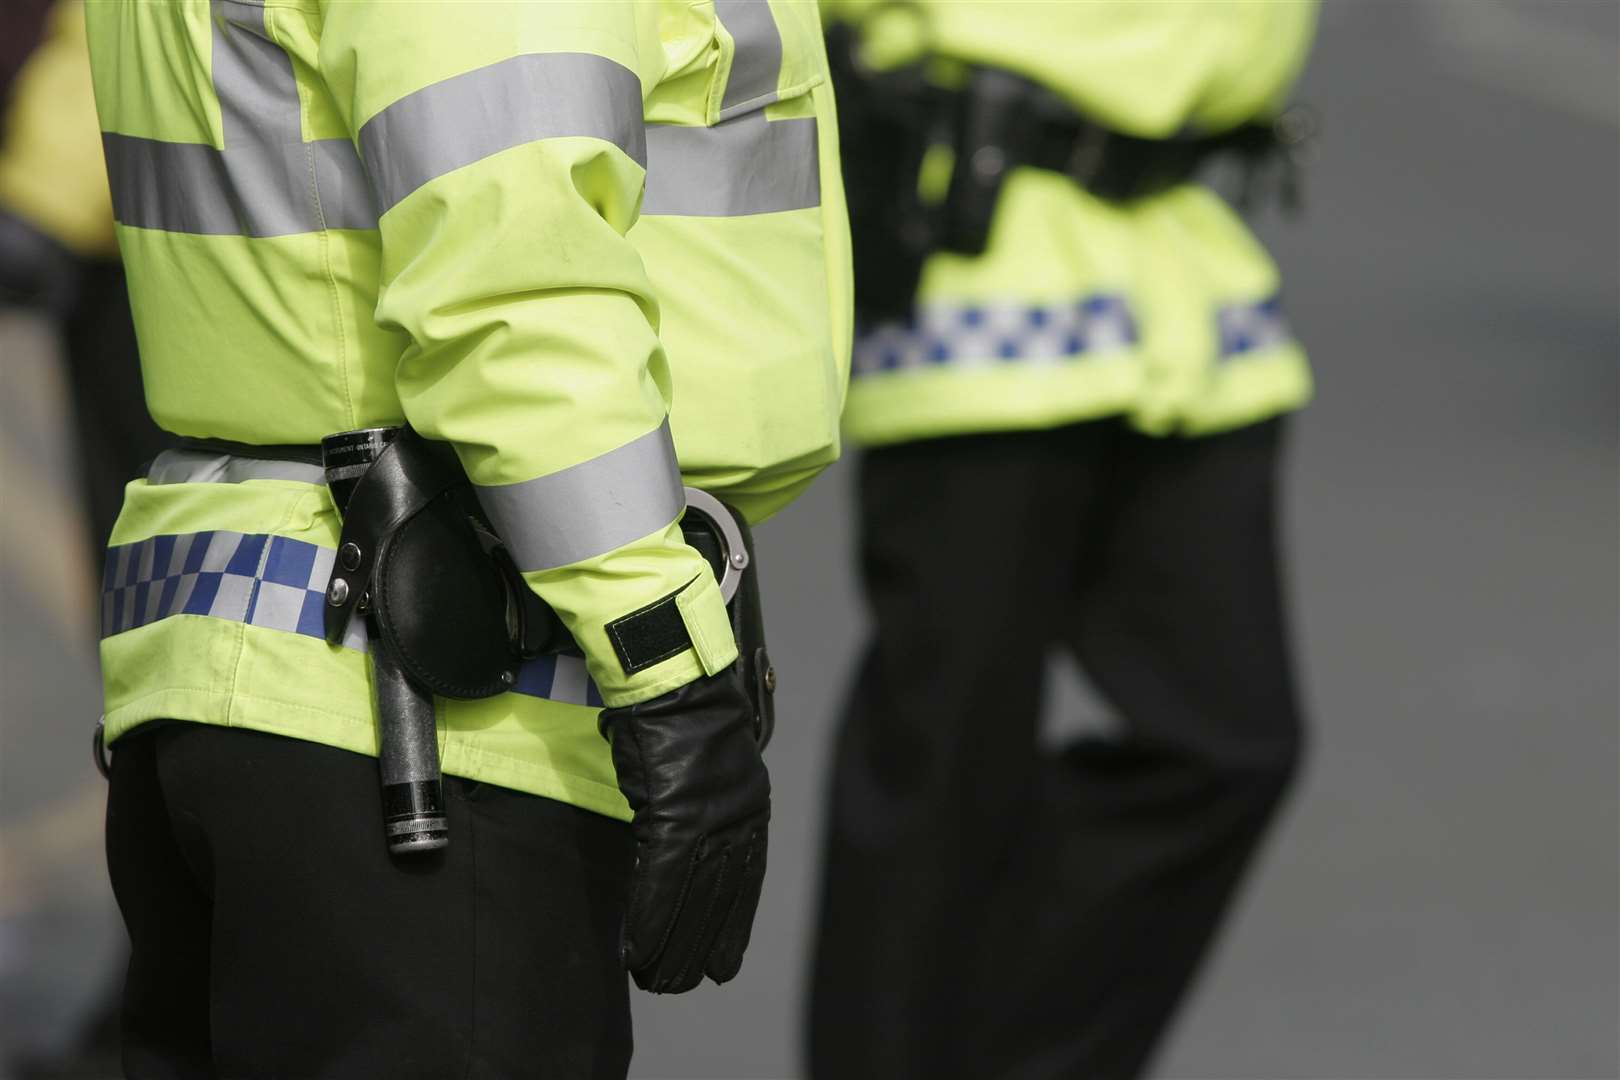 British Police, High visibility slug police gm caption police on patrol copyright iStochphoto photographer c/o iStockphoto contact Thinkstock Image Library 0800 028 6268 conditions none Picture: Getty Images Toll free number : 0800 028 6268 Telephone number : 0203 2272347 uksales@thinkstock.com (1027873)